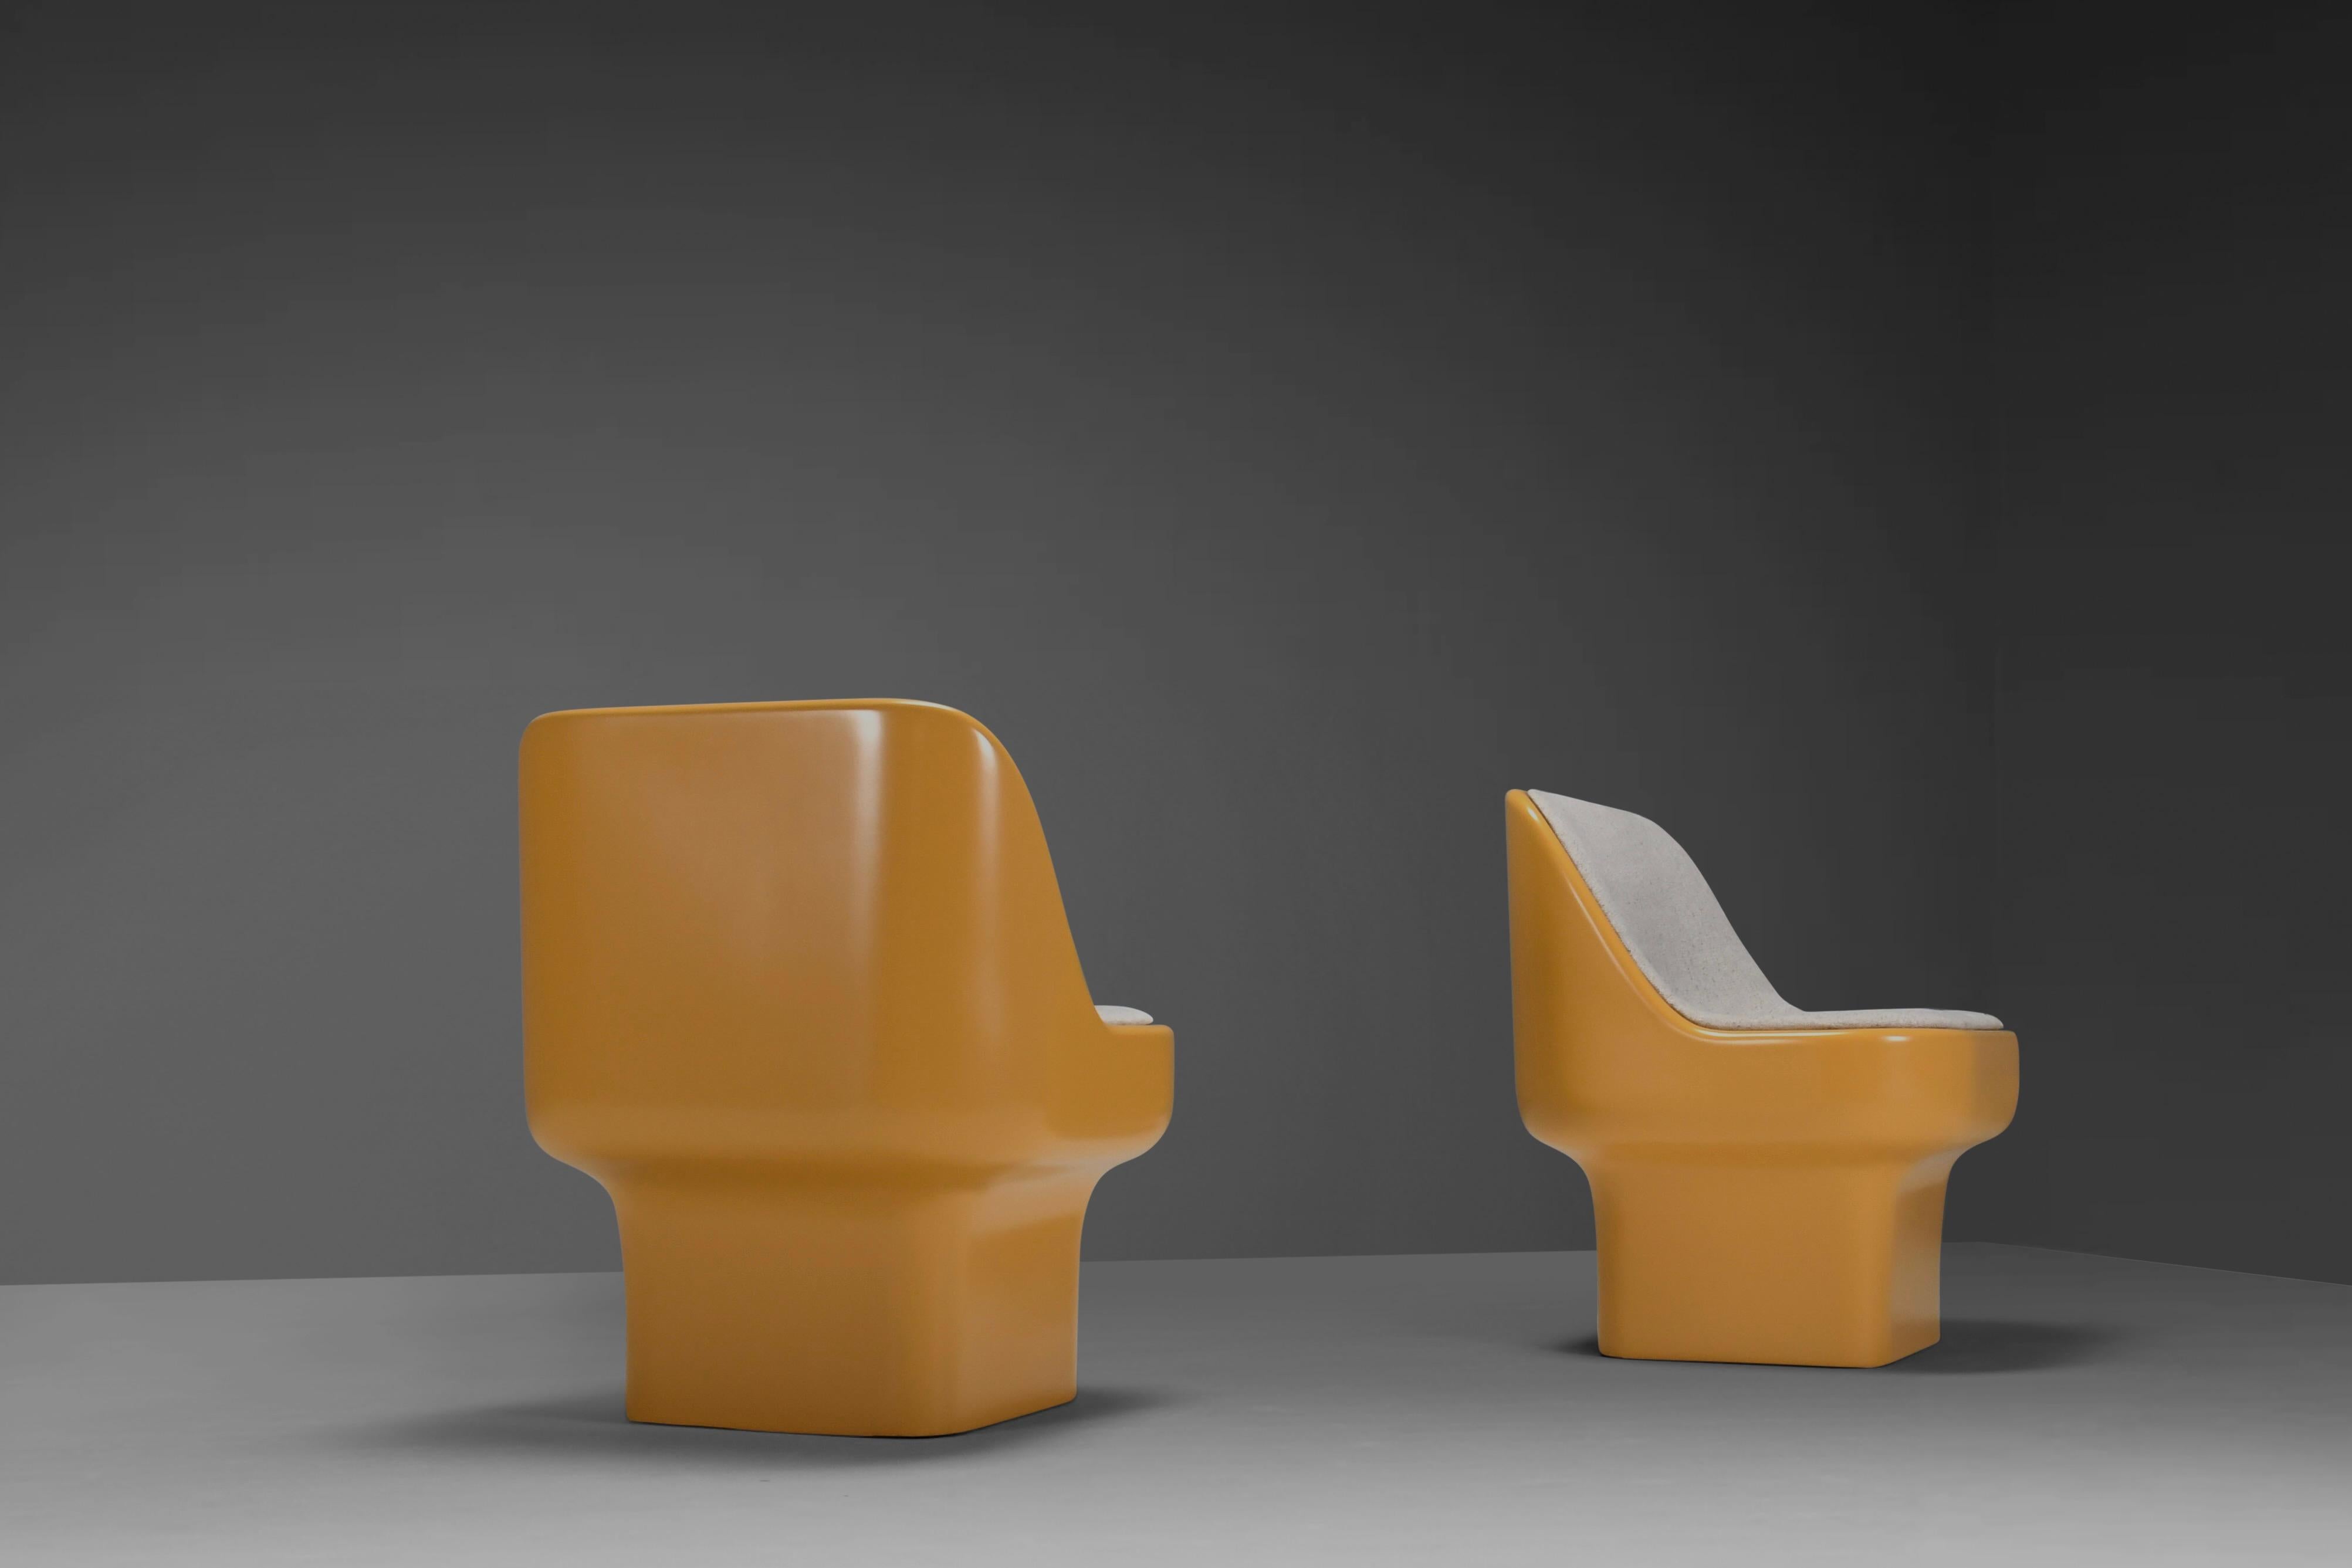 American Set of Lounge Chairs by Douglas Deeds for Architectural Fiberglass Co, 1972 For Sale